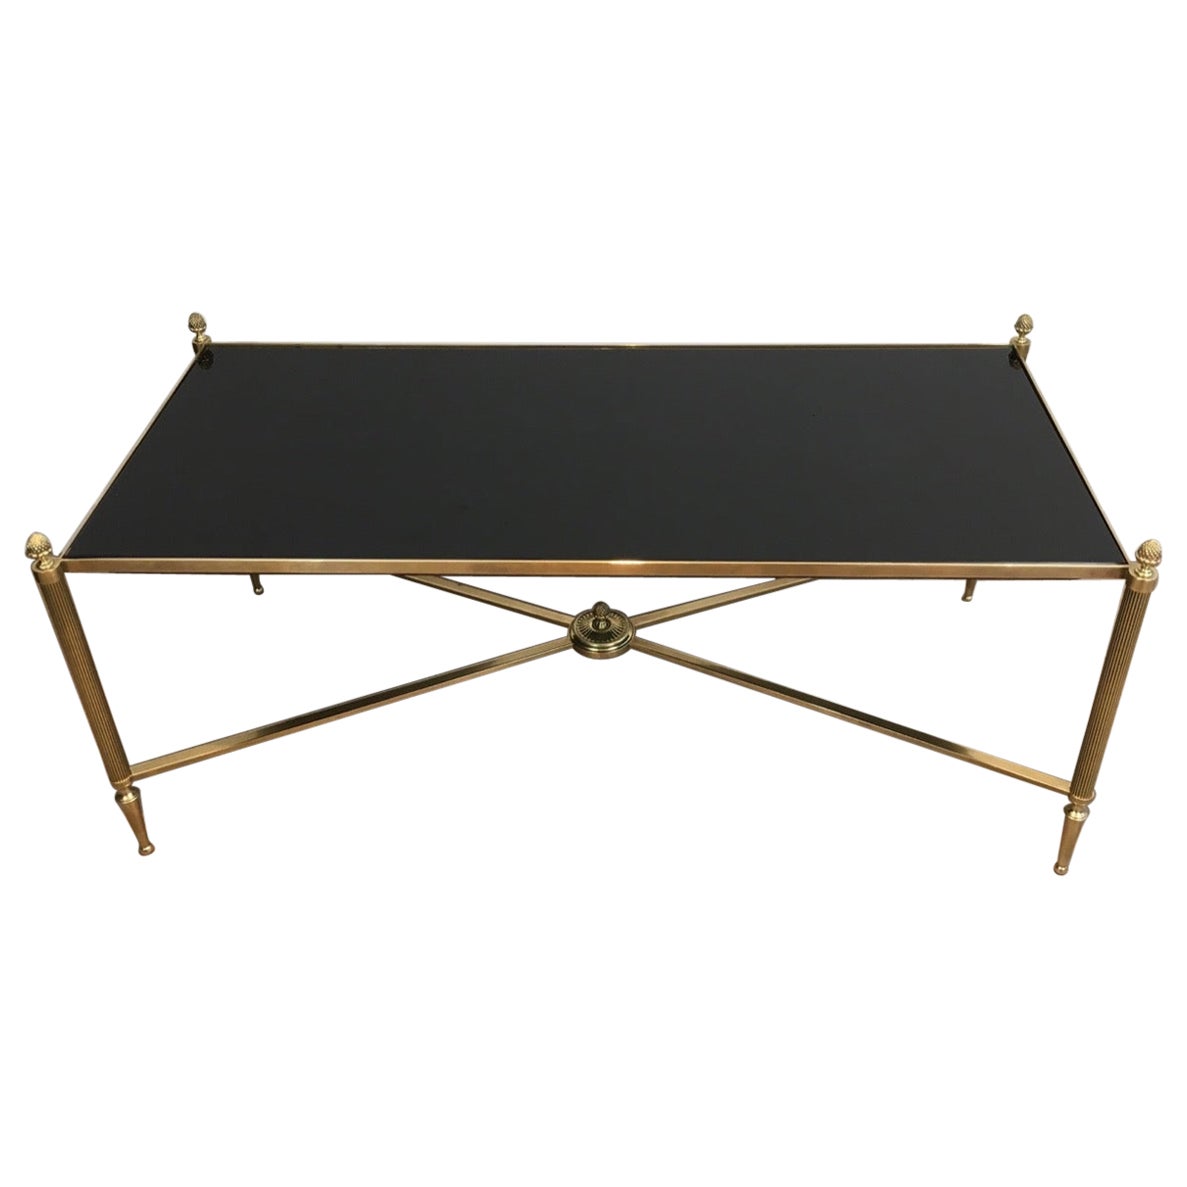 Maison Bagués, Neoclassical Style Brass Coffee Table with Black Lacquered Glass